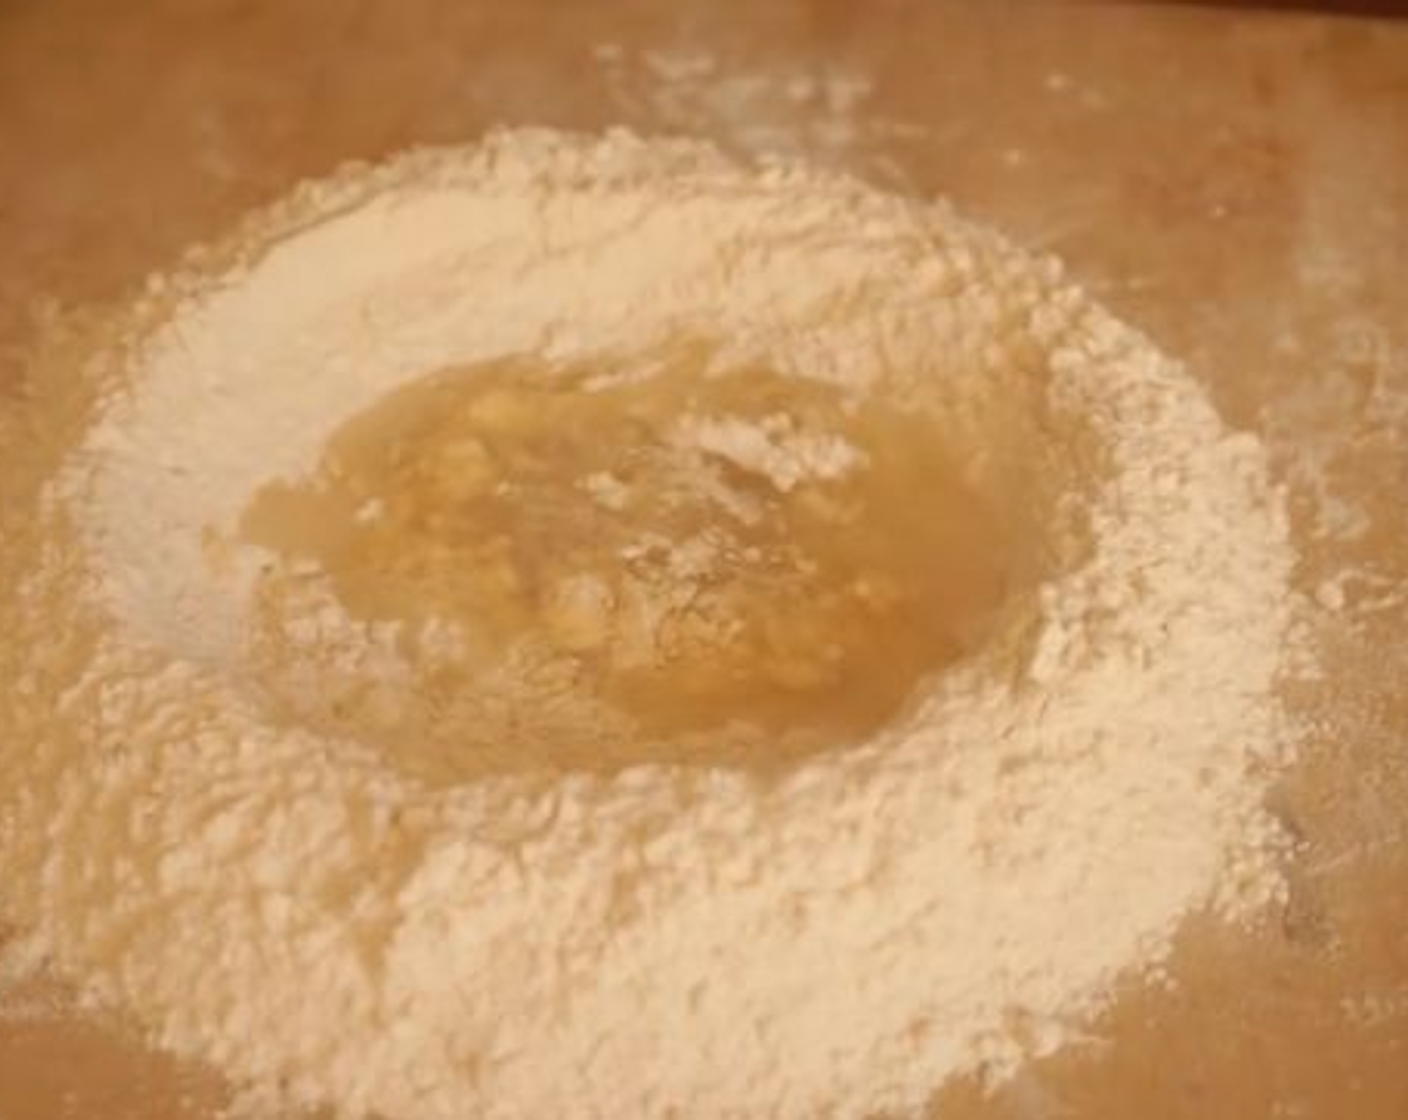 step 1 To start making Pasta e Fagioli you first prepare the sagne pasta dough, so pour flour on your wooden board. Make a mound with the All-Purpose Flour (4 cups) and create a well in the center. Crack the Egg (1) into the well and start whisking it carefully using a fork.